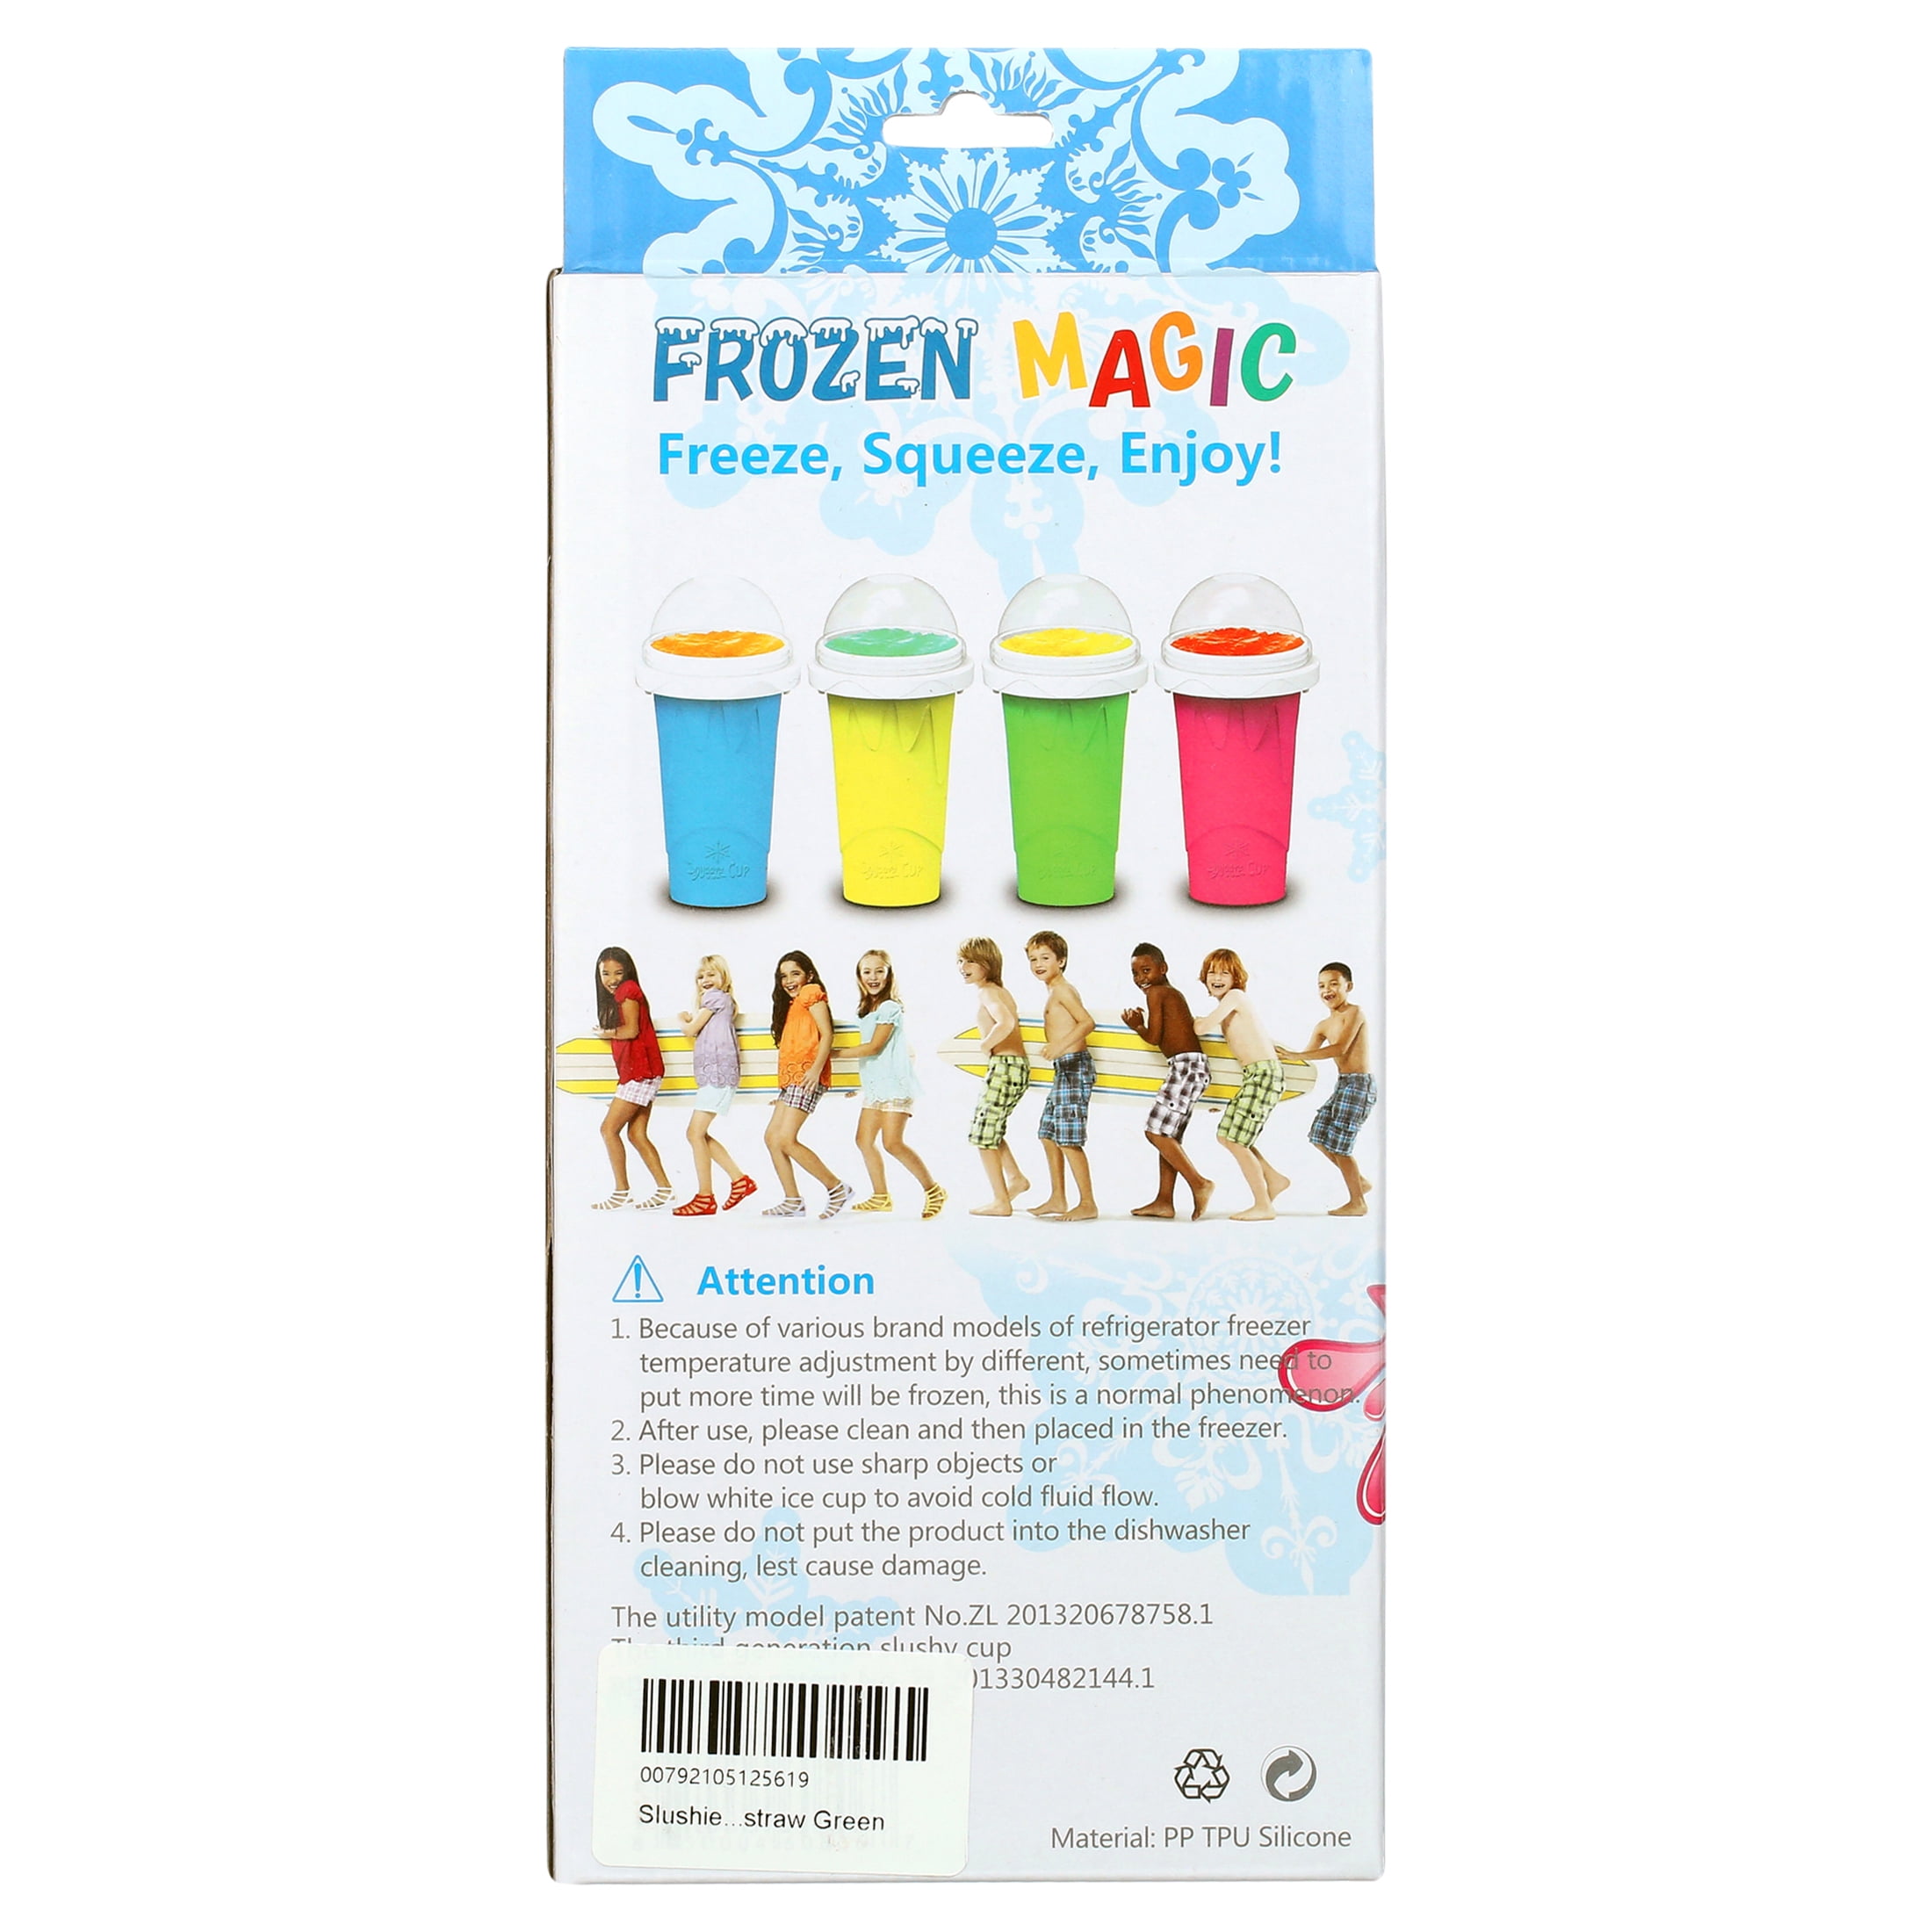  KTEBO Frozen Magic Slushy Cup, Smoothie Cups with Lids and  Straws, Slushie Maker Cup is Cool Stuff Things, Fasting Cooling Make  Milkshake smoothie Freeze Beer - TIKT0K Trend Items Cool Gadgets-Blue